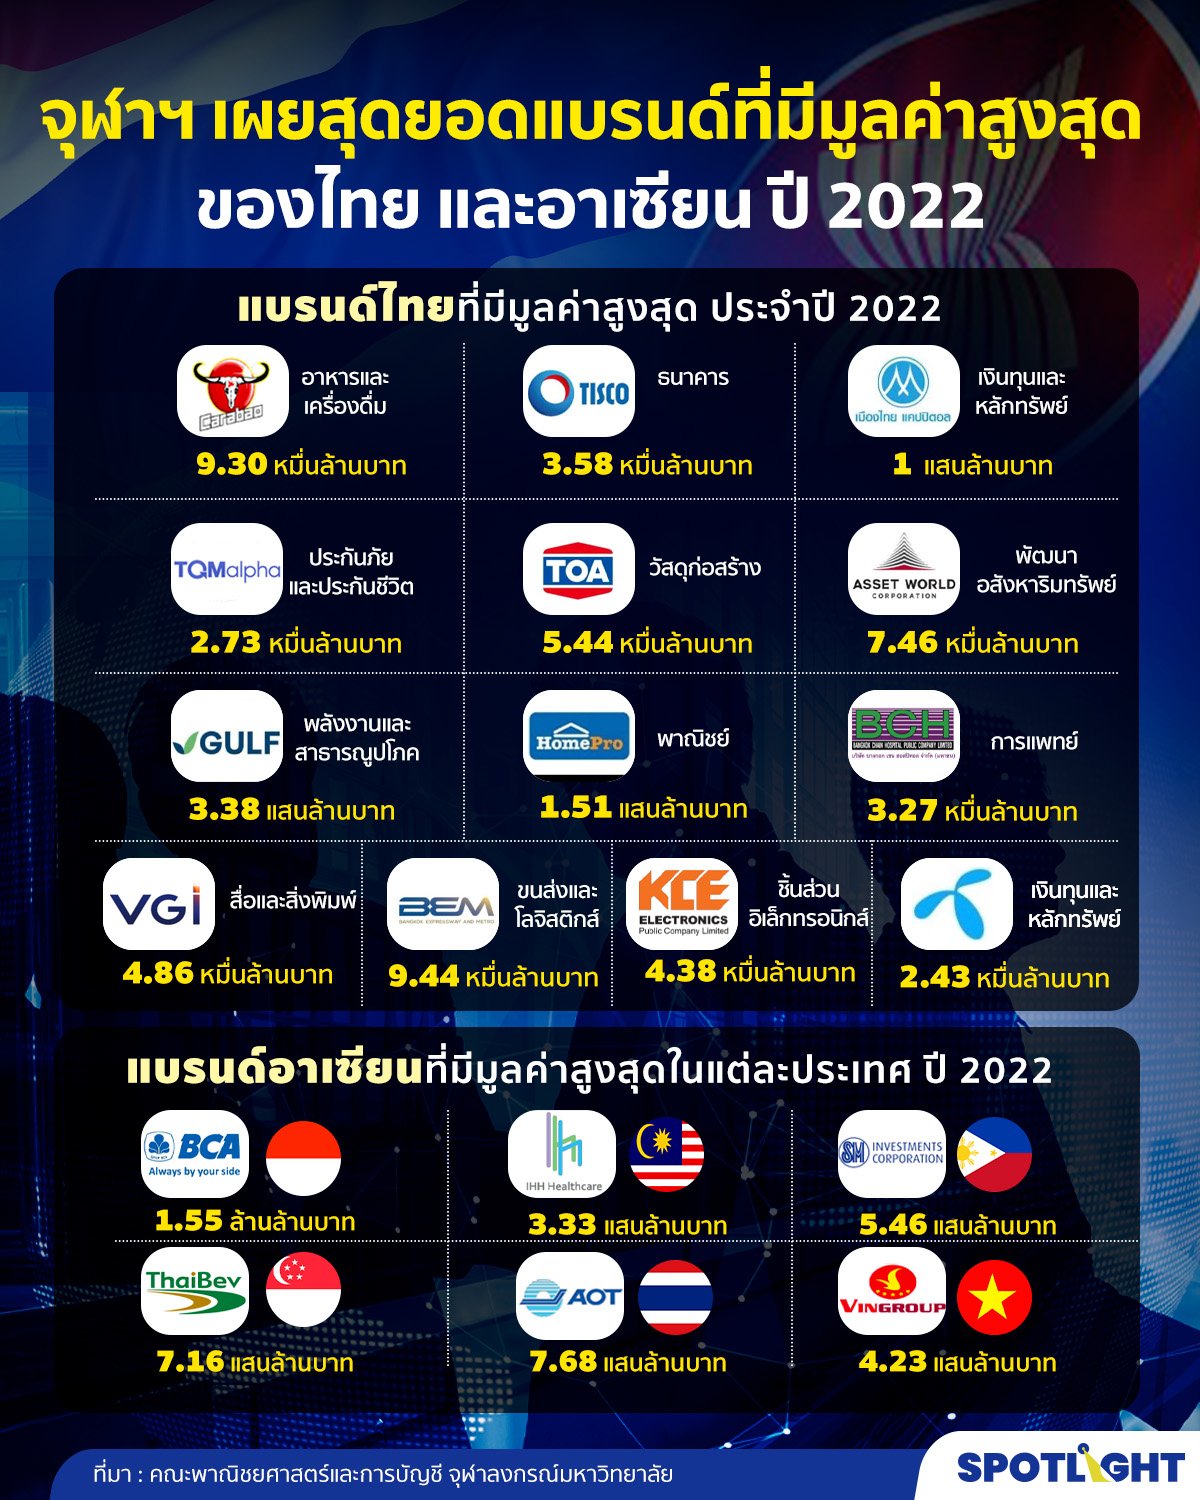 ASEAN and Thailand’s Top Corporate Brands 2022